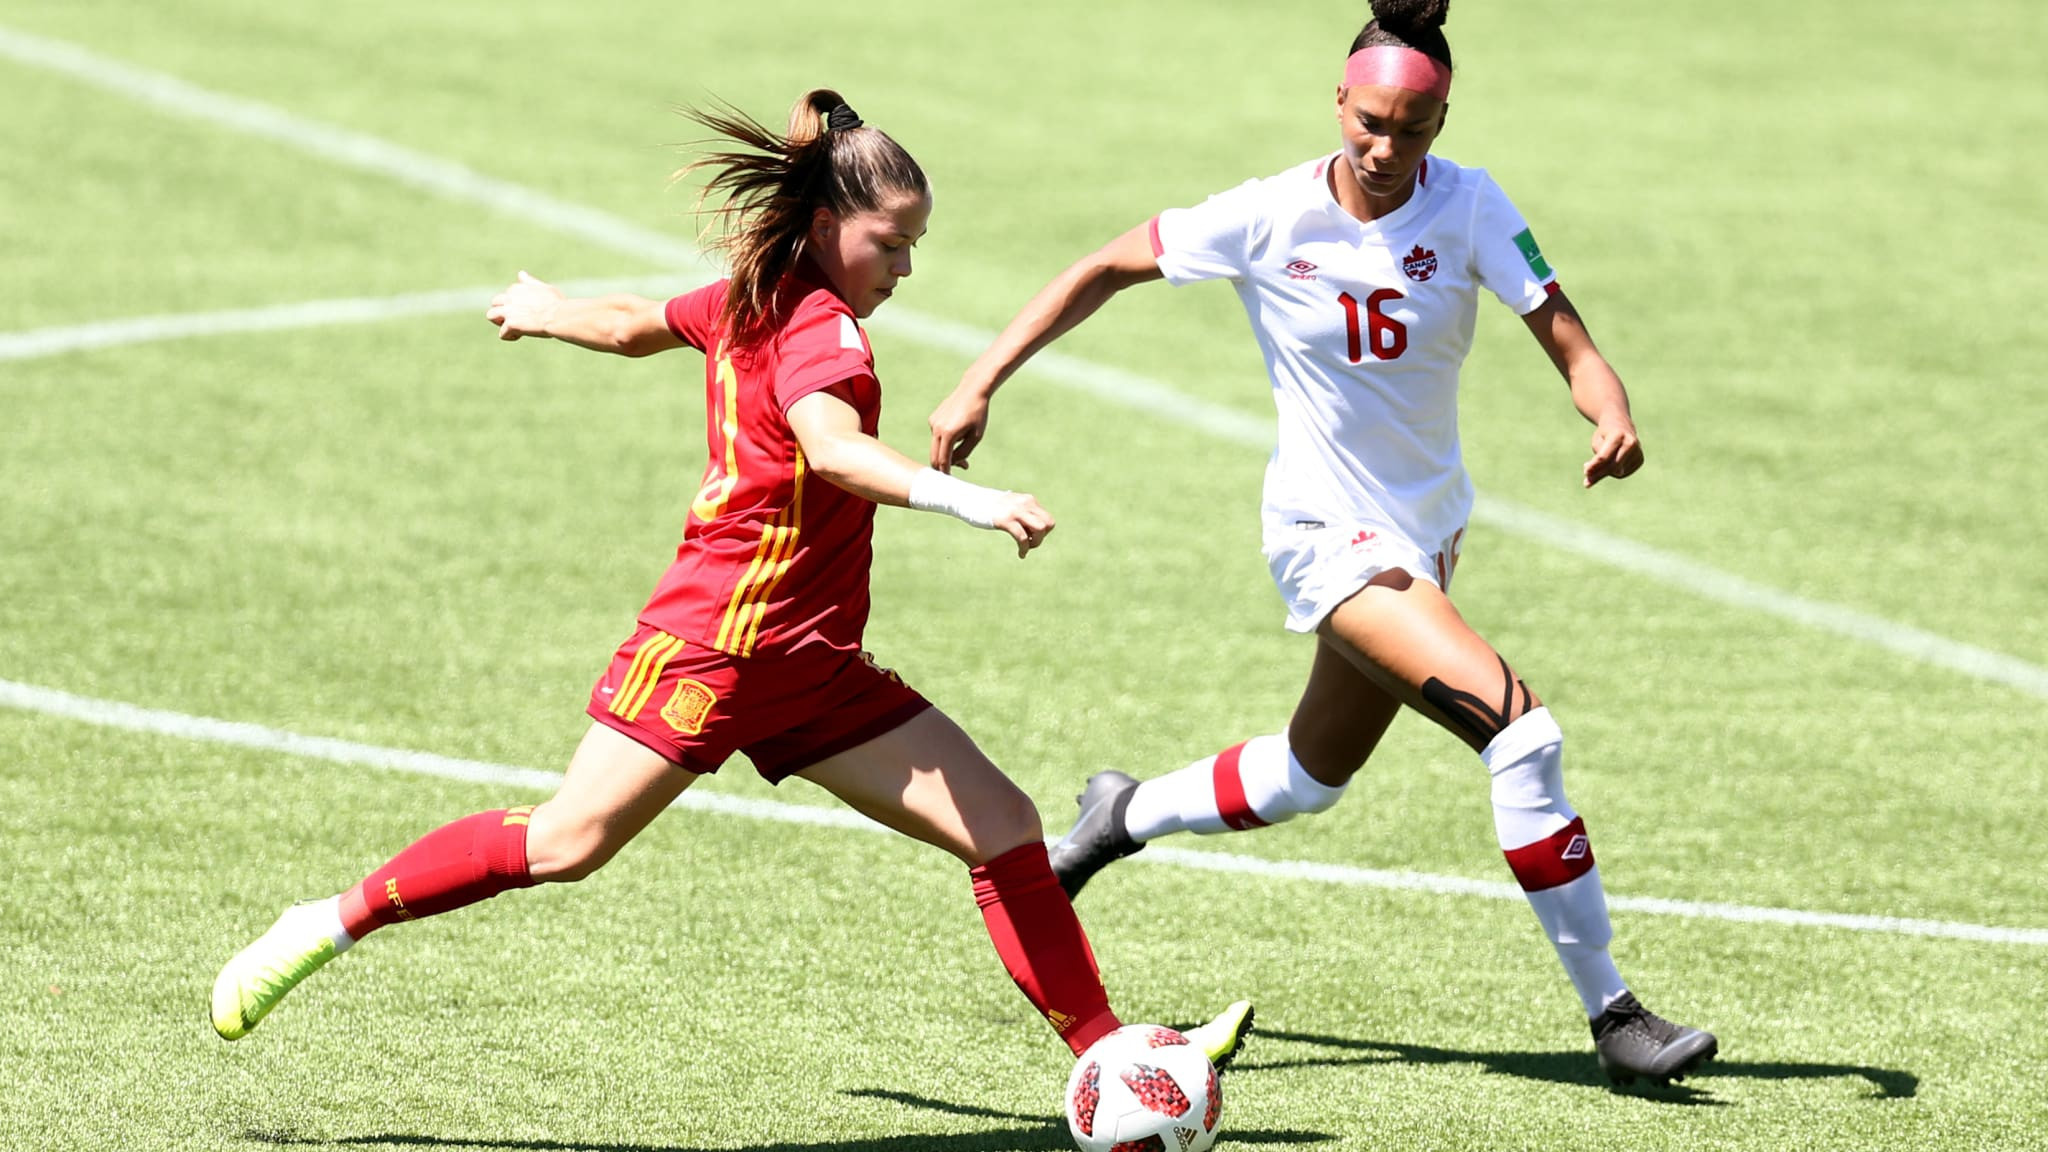 Quarter-final line-up decided as Spain and Germany register emphatic wins at FIFA Under-17 Women’s World Cup